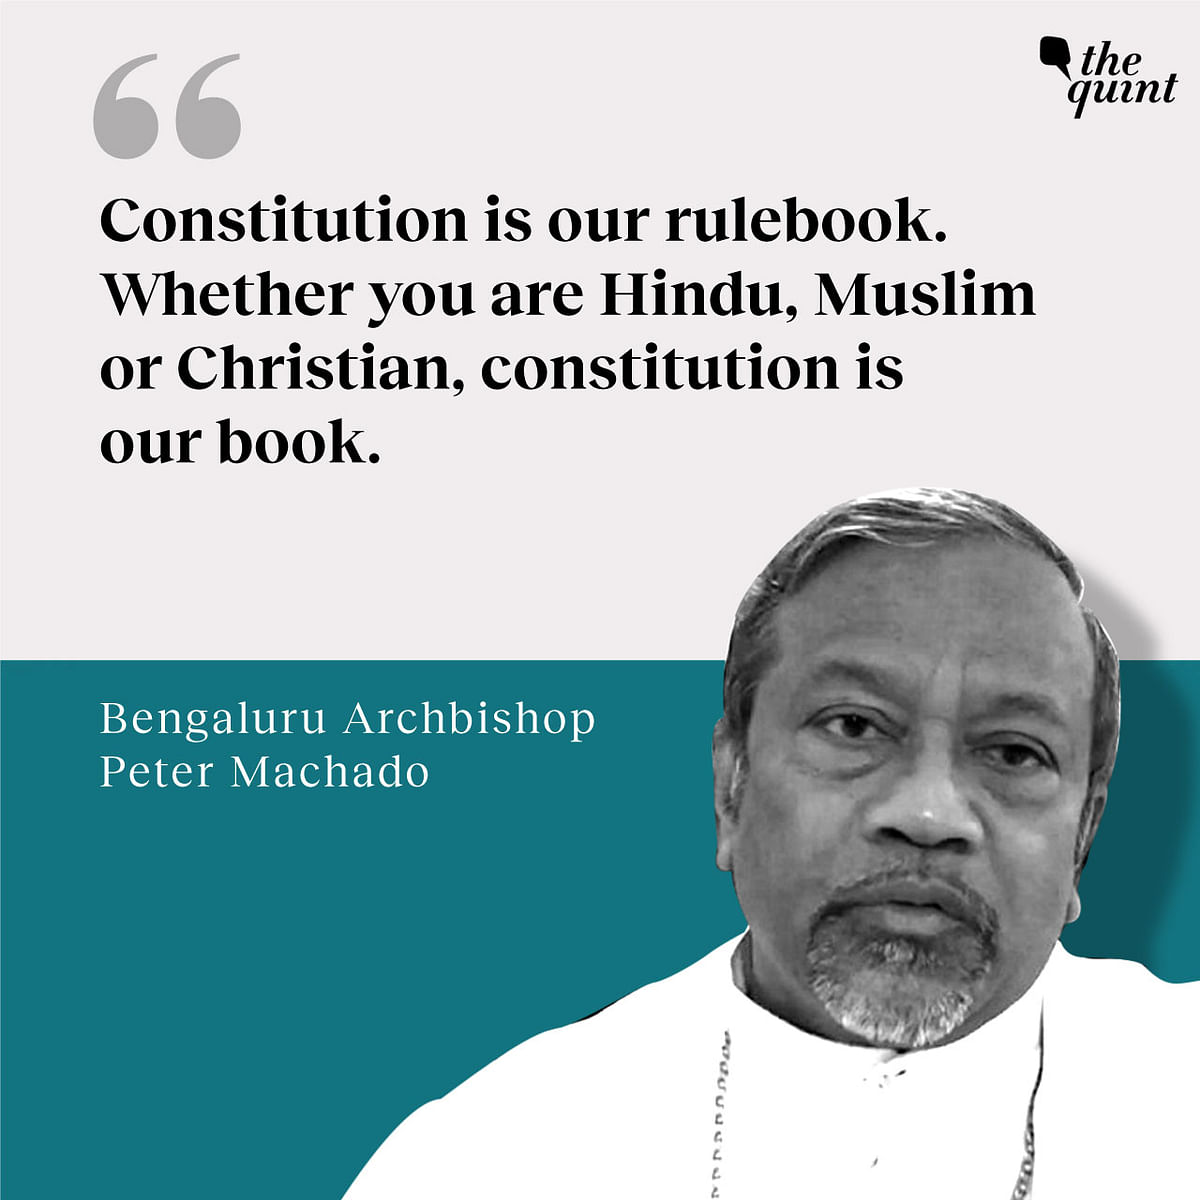 Archbishop Peter Machado asked the BJP government to rein-in the fringe elements which target minorities. 